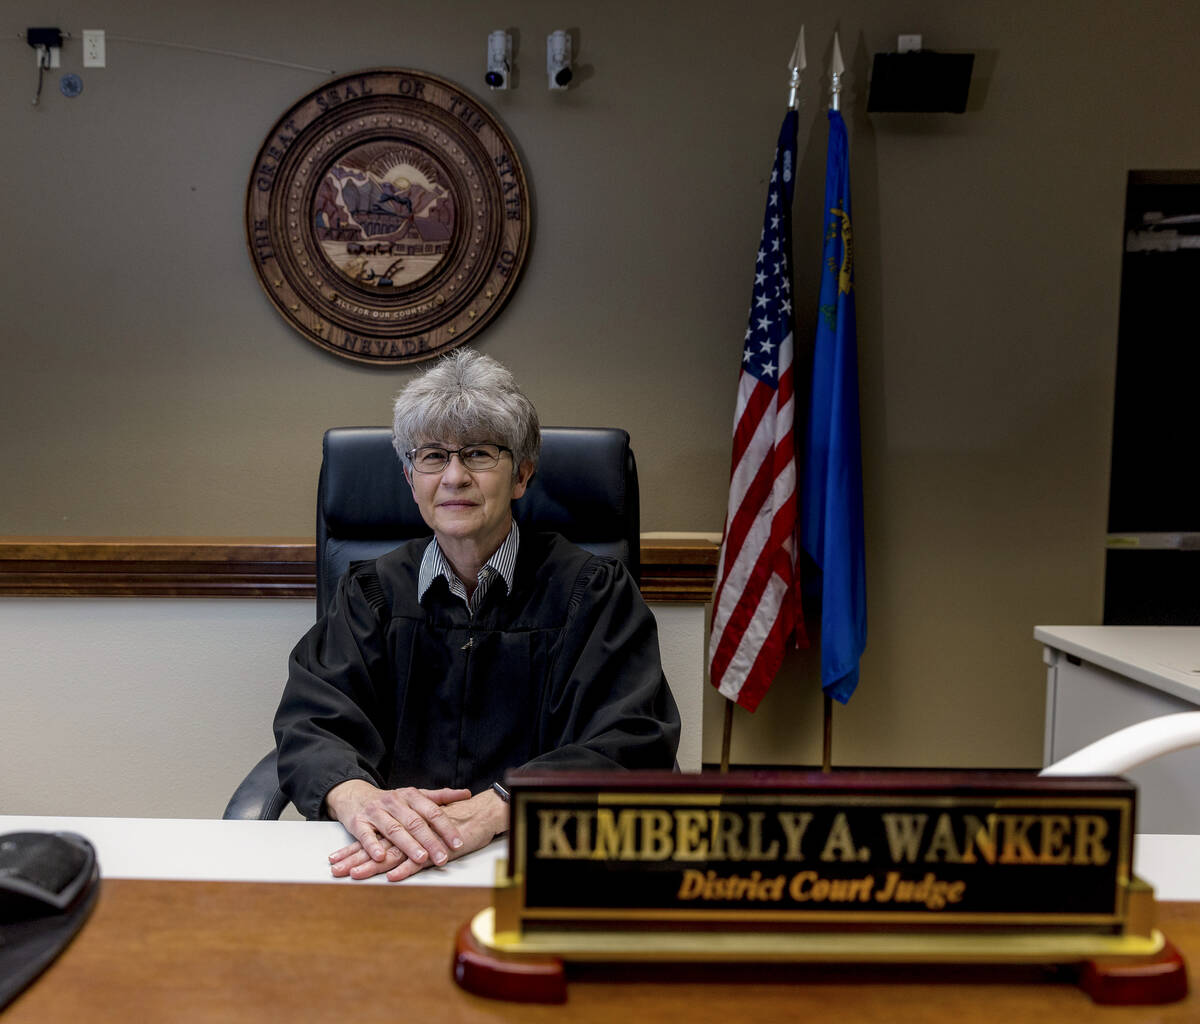 Nye County District Judge Kim Wanker In Her Courtroom At The Gerald ‘bear Smith Courthouse